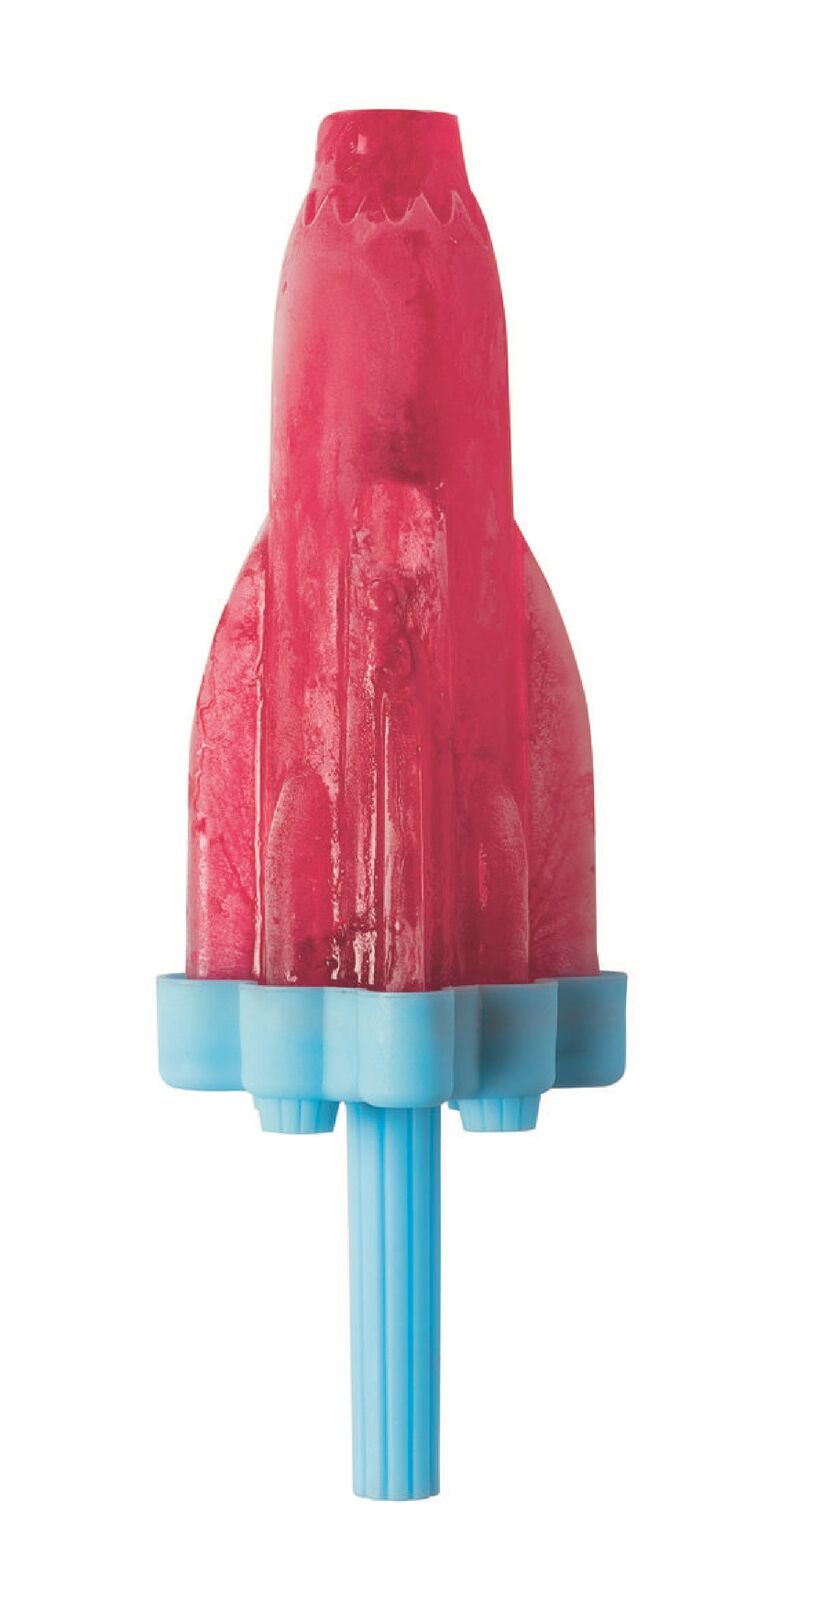 Tovolo Rocket Ice Pop / Popsicle Mold - Set of 6 NEW